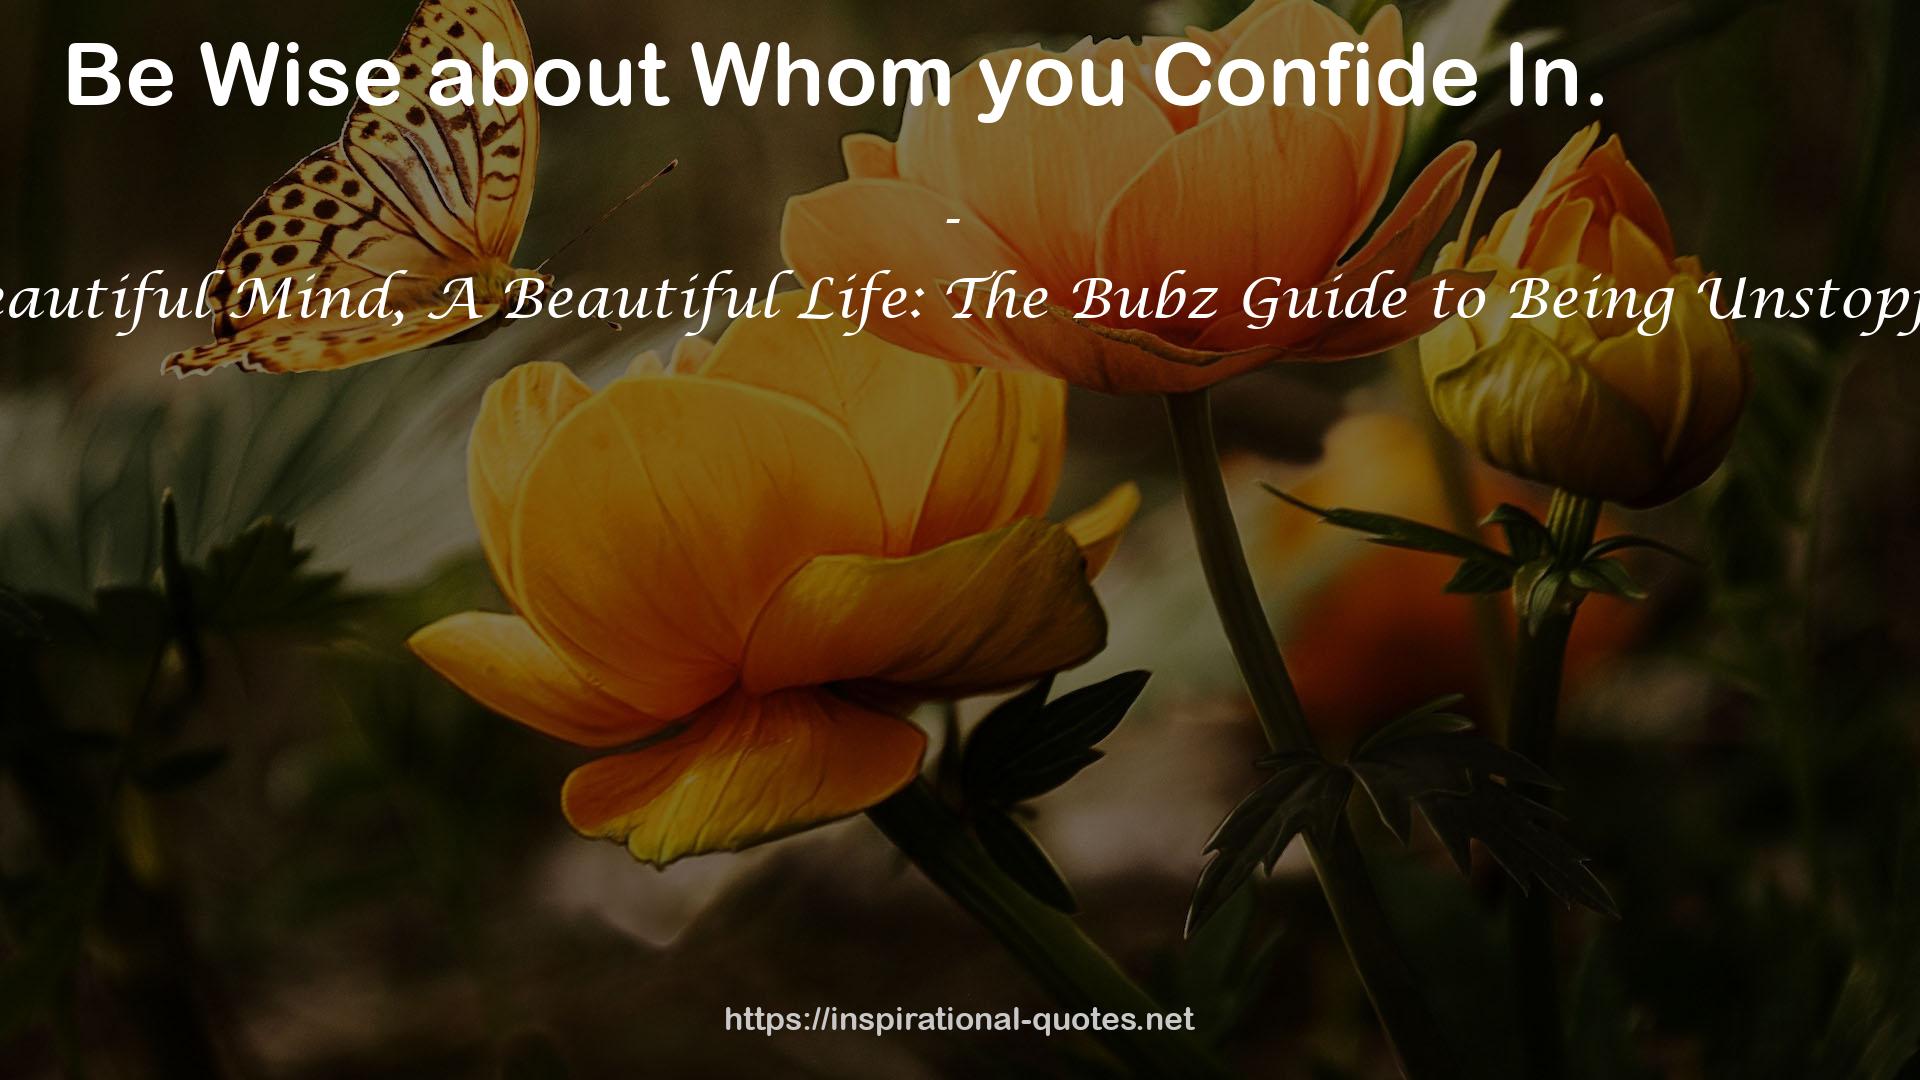 A Beautiful Mind, A Beautiful Life: The Bubz Guide to Being Unstoppable QUOTES